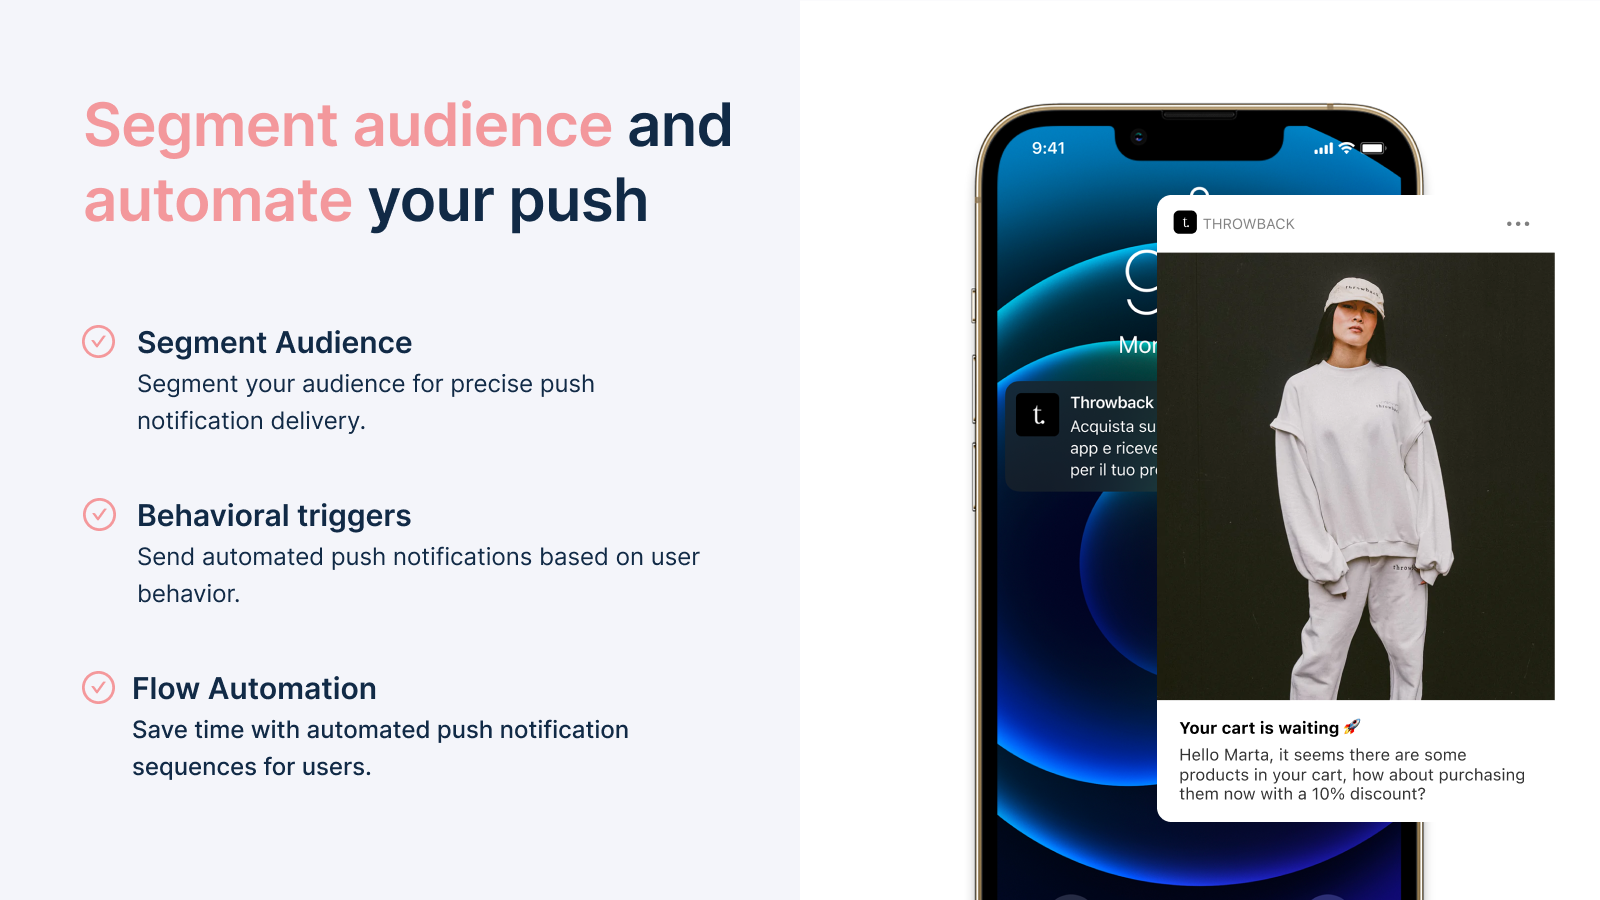 Engage your customers directly with impactful push notifications